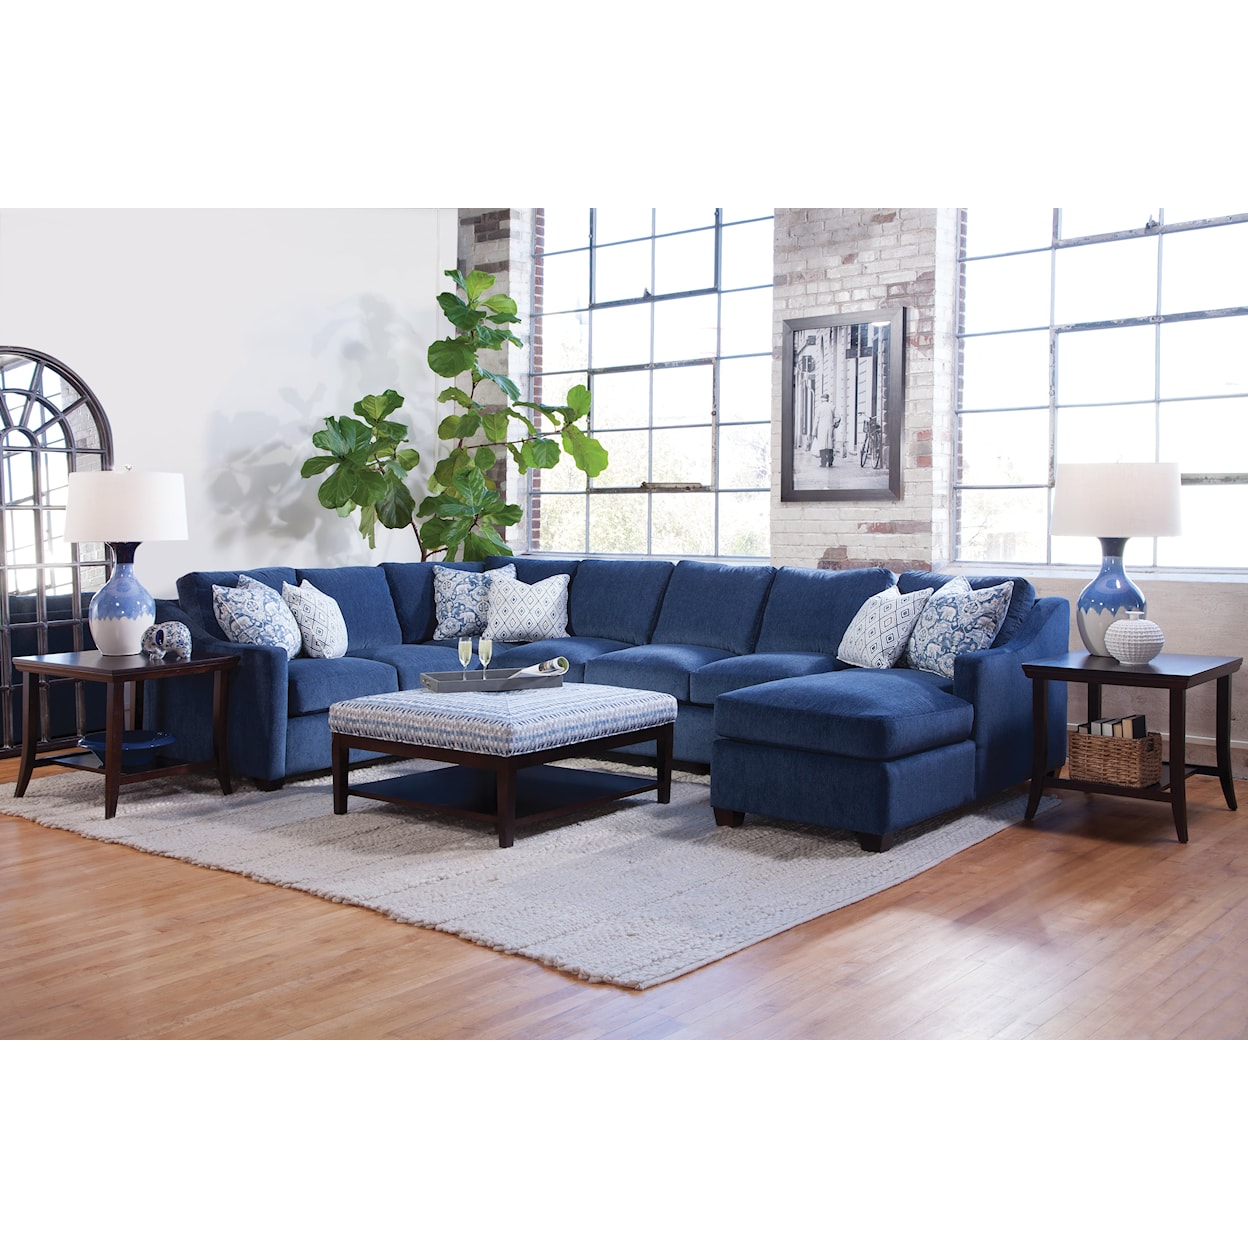 Braxton Culler Oliver Oliver 3-Piece Chaise Sectional